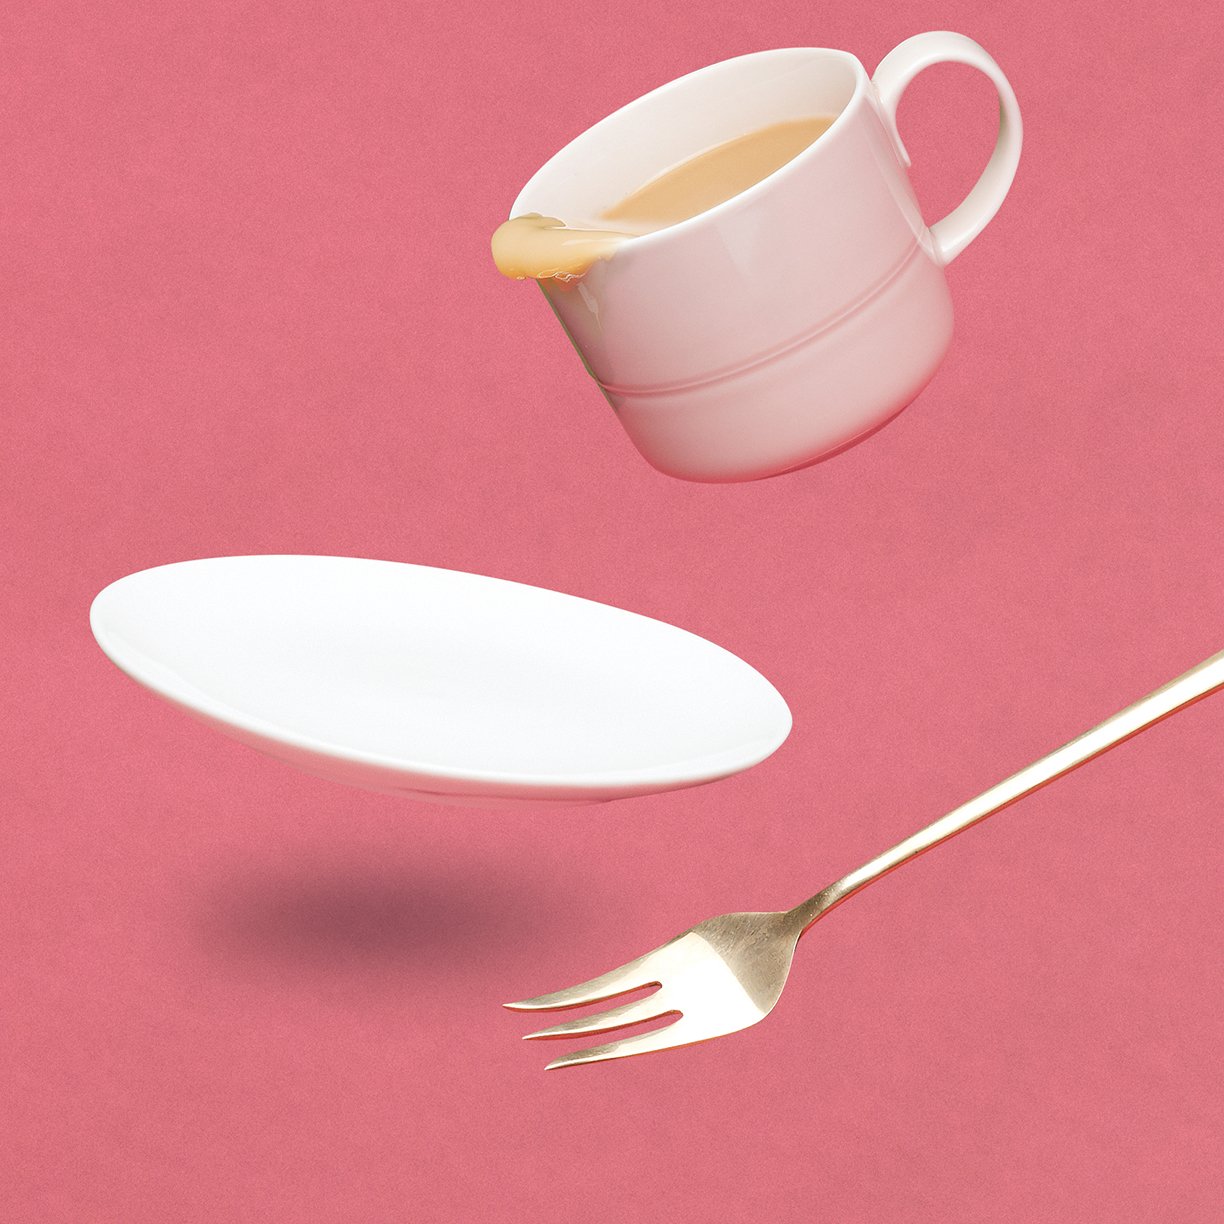 Cup, saucer, spoon, as the new weed revolution takes over